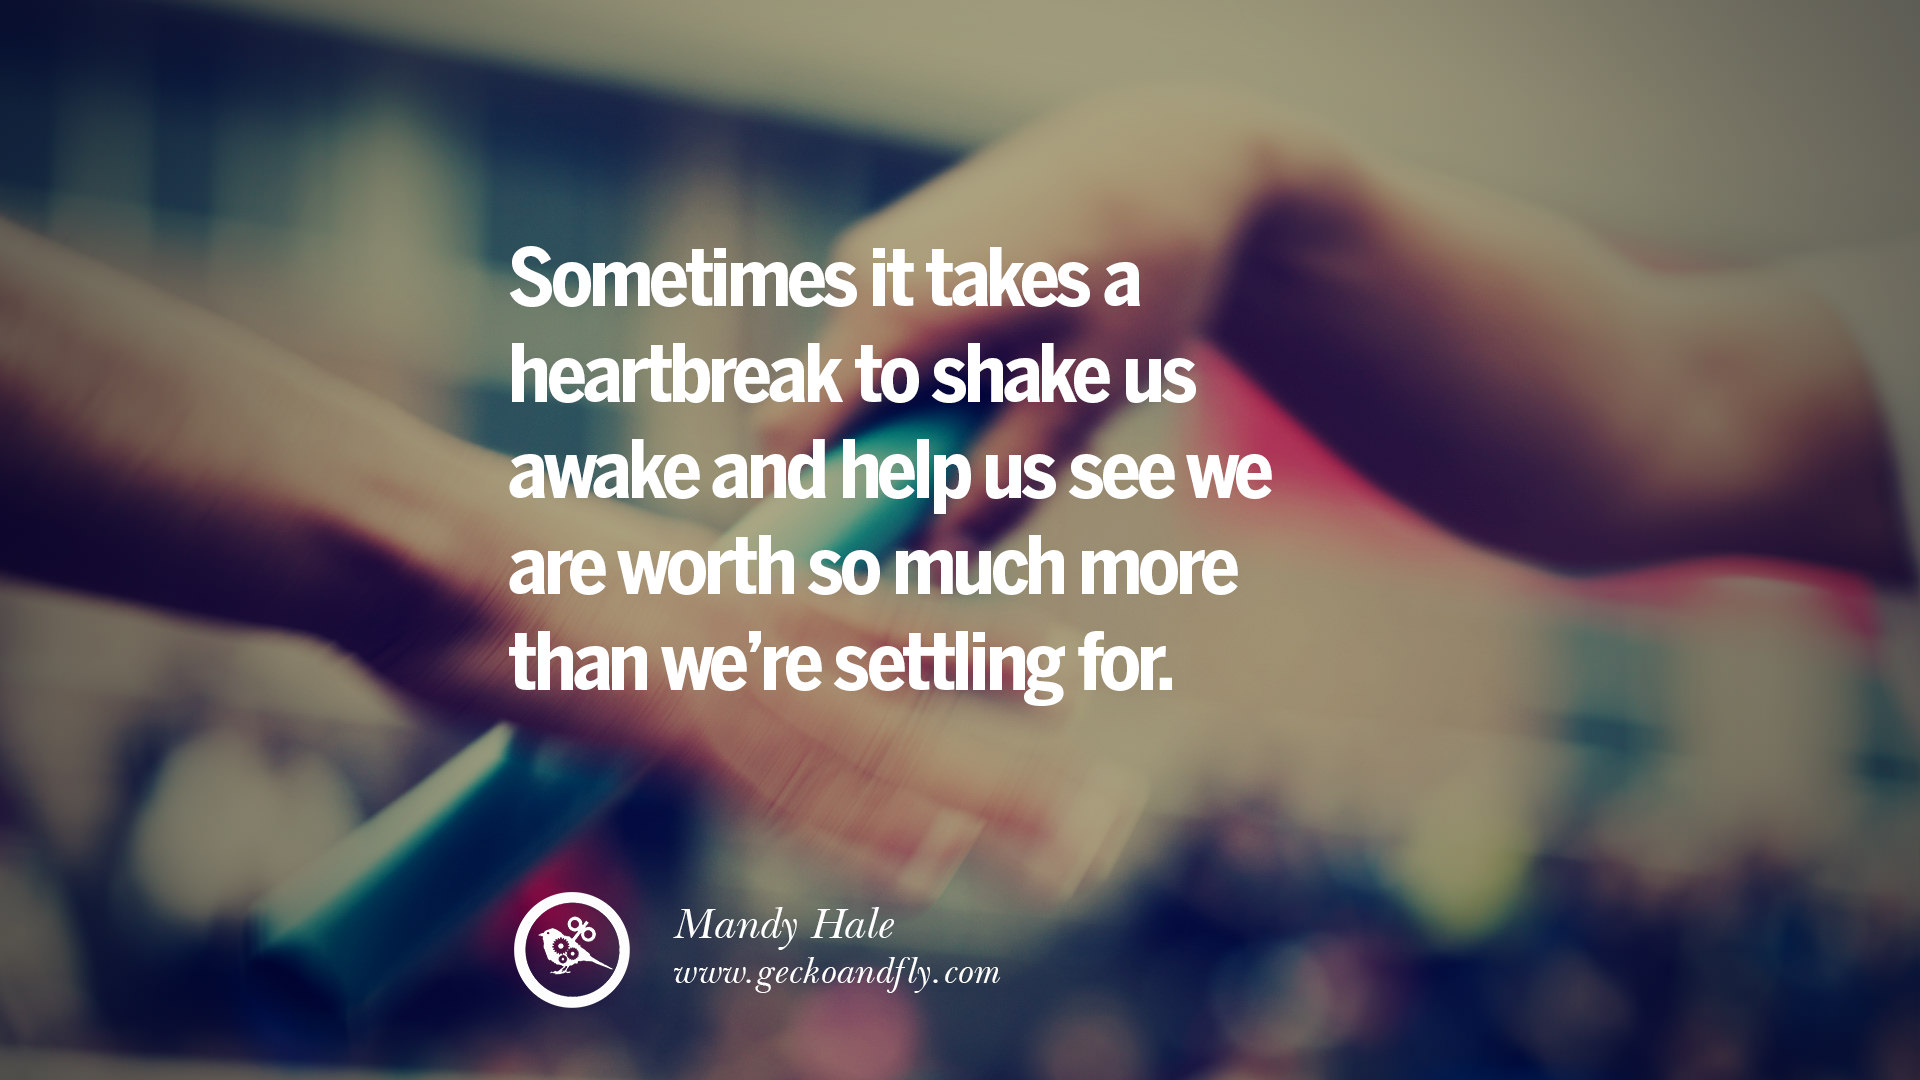 Sometimes it takes a heartbreak to shake us awake and help us see we are worth